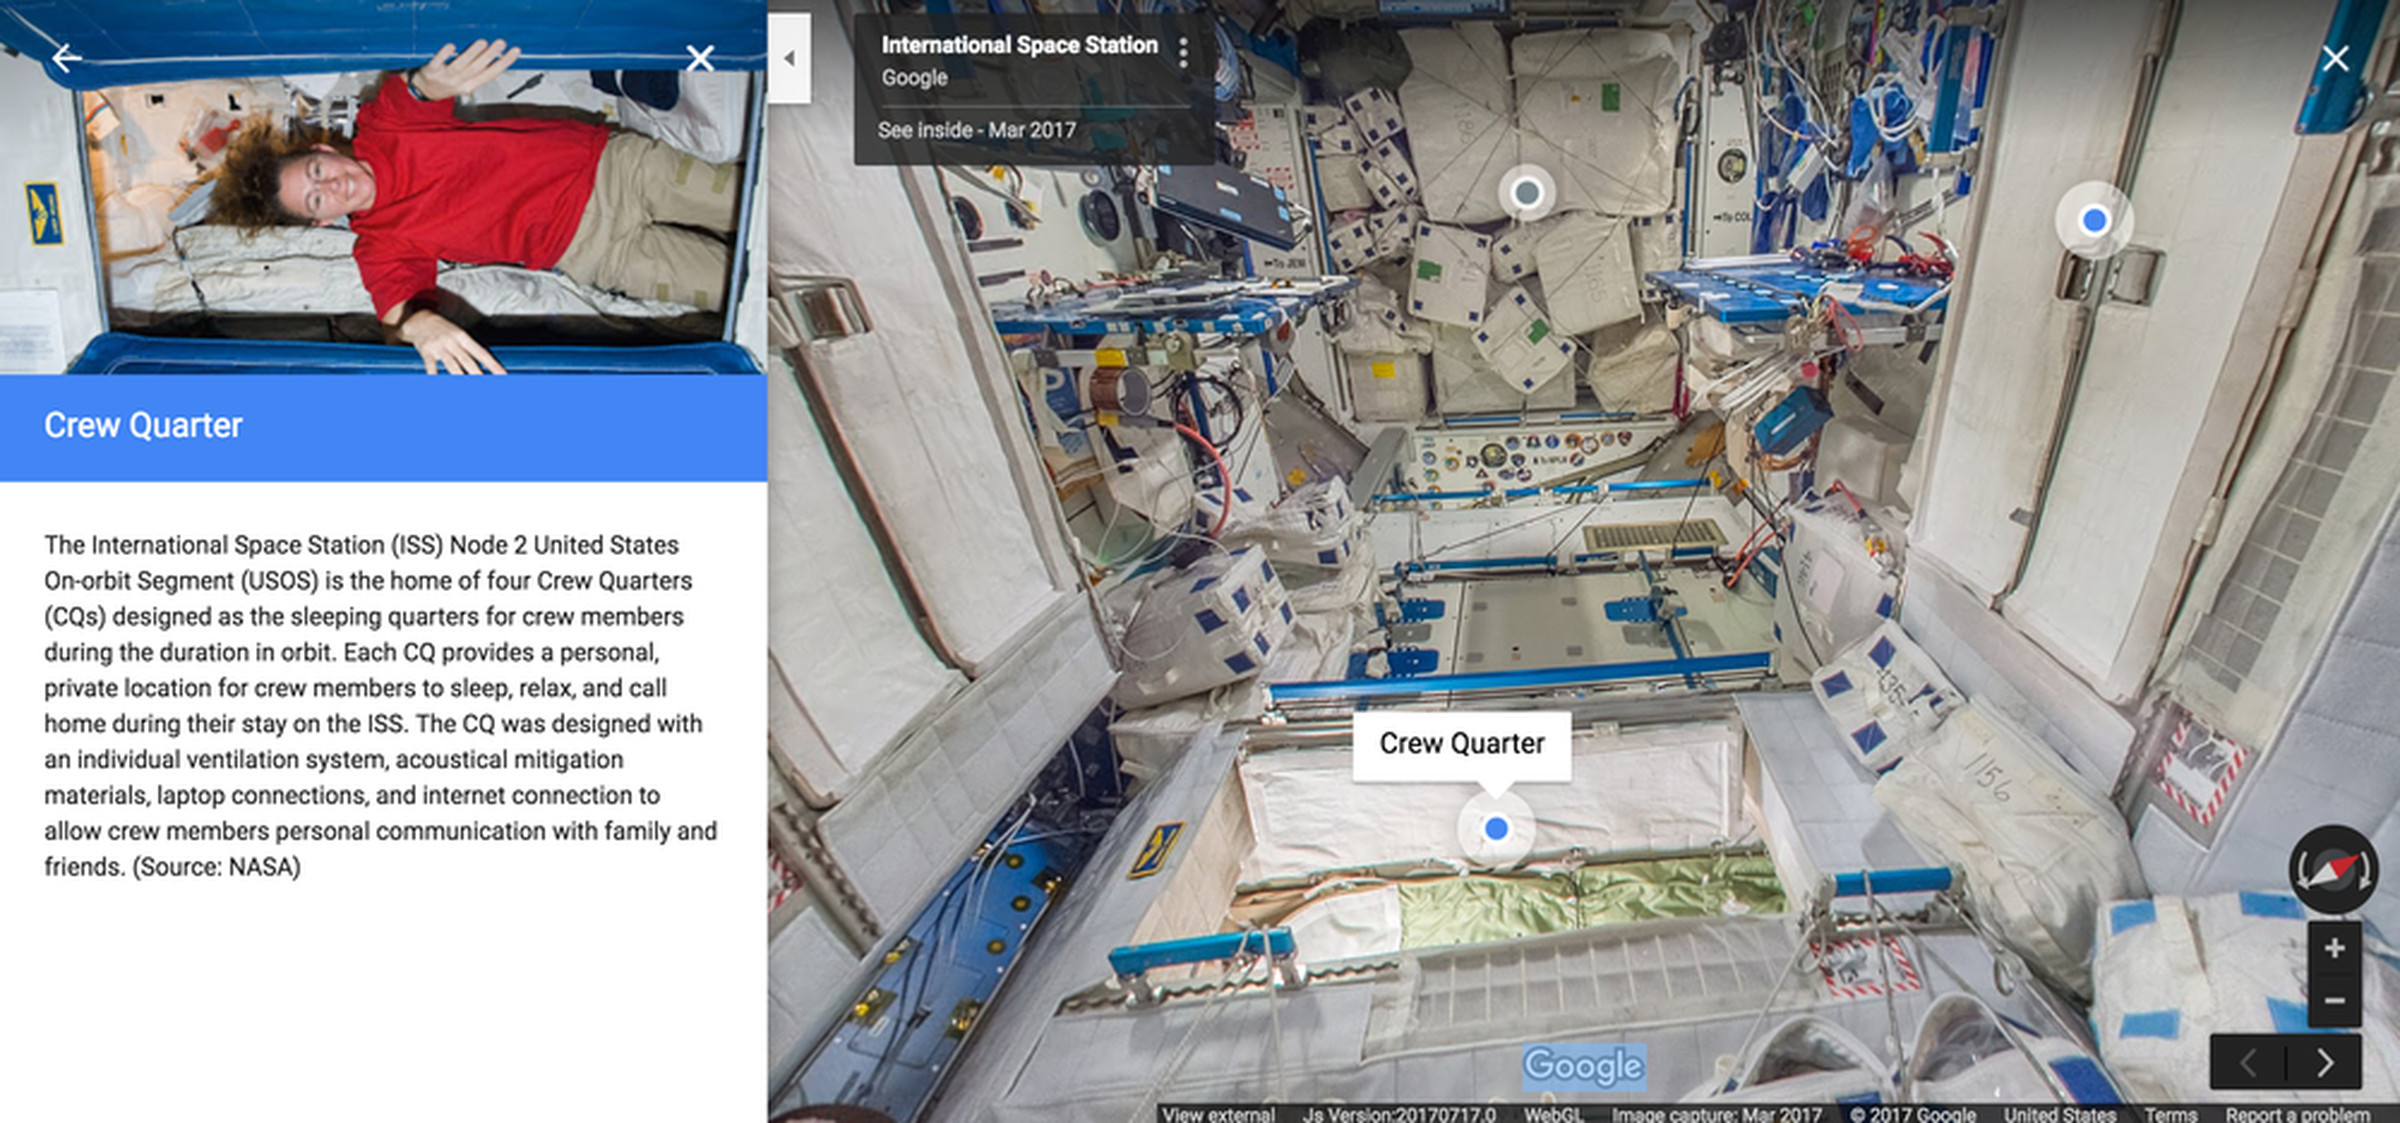 Google Street View on the ISS has annotations to explore.